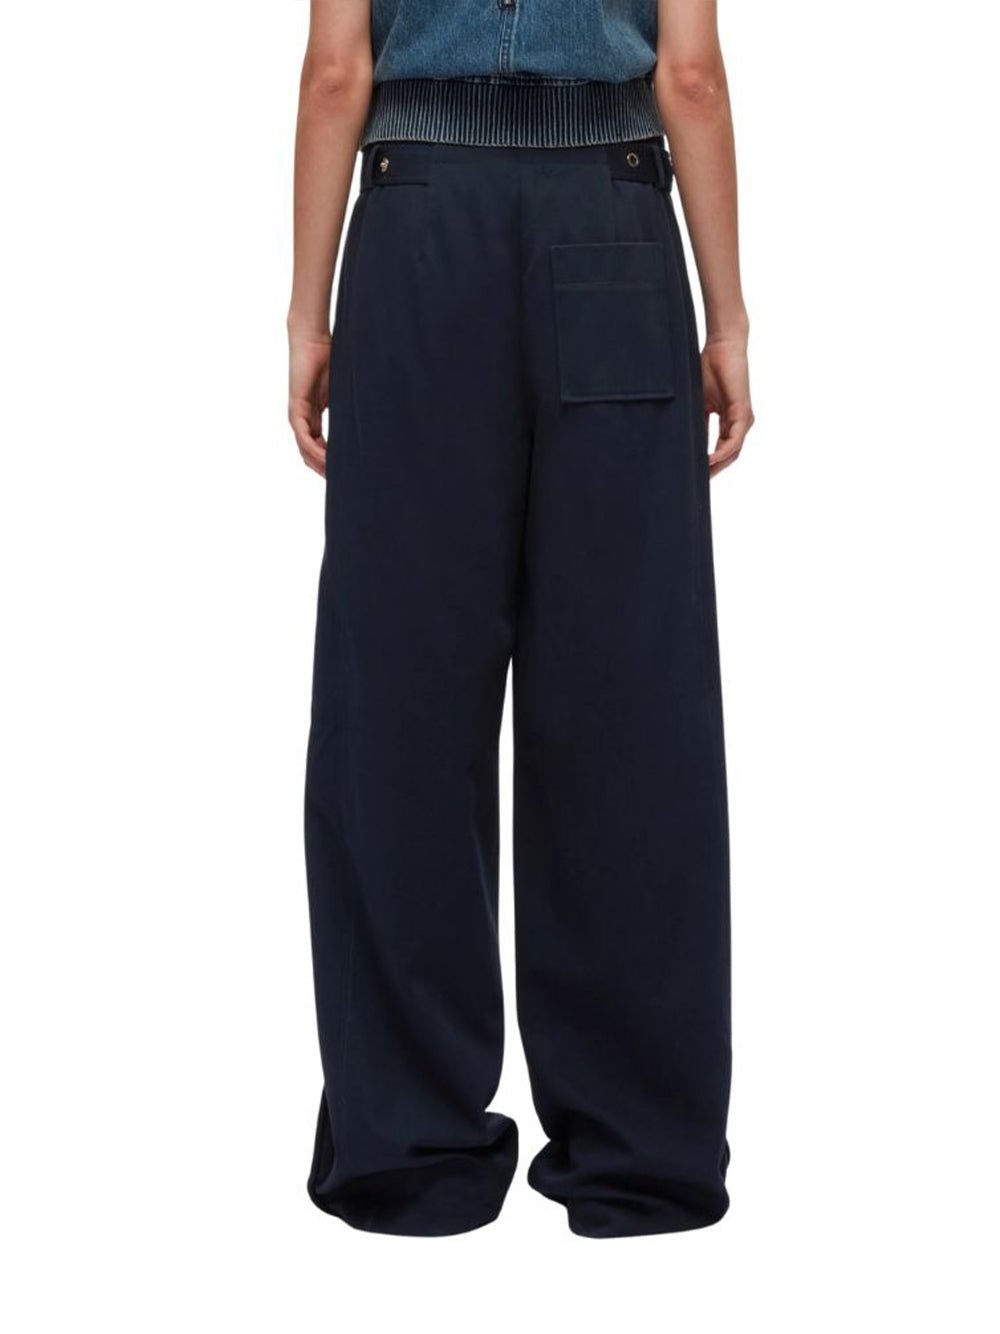 3.1 Phillip Lim-Belted Utility Pant W Panel-Midnight-3